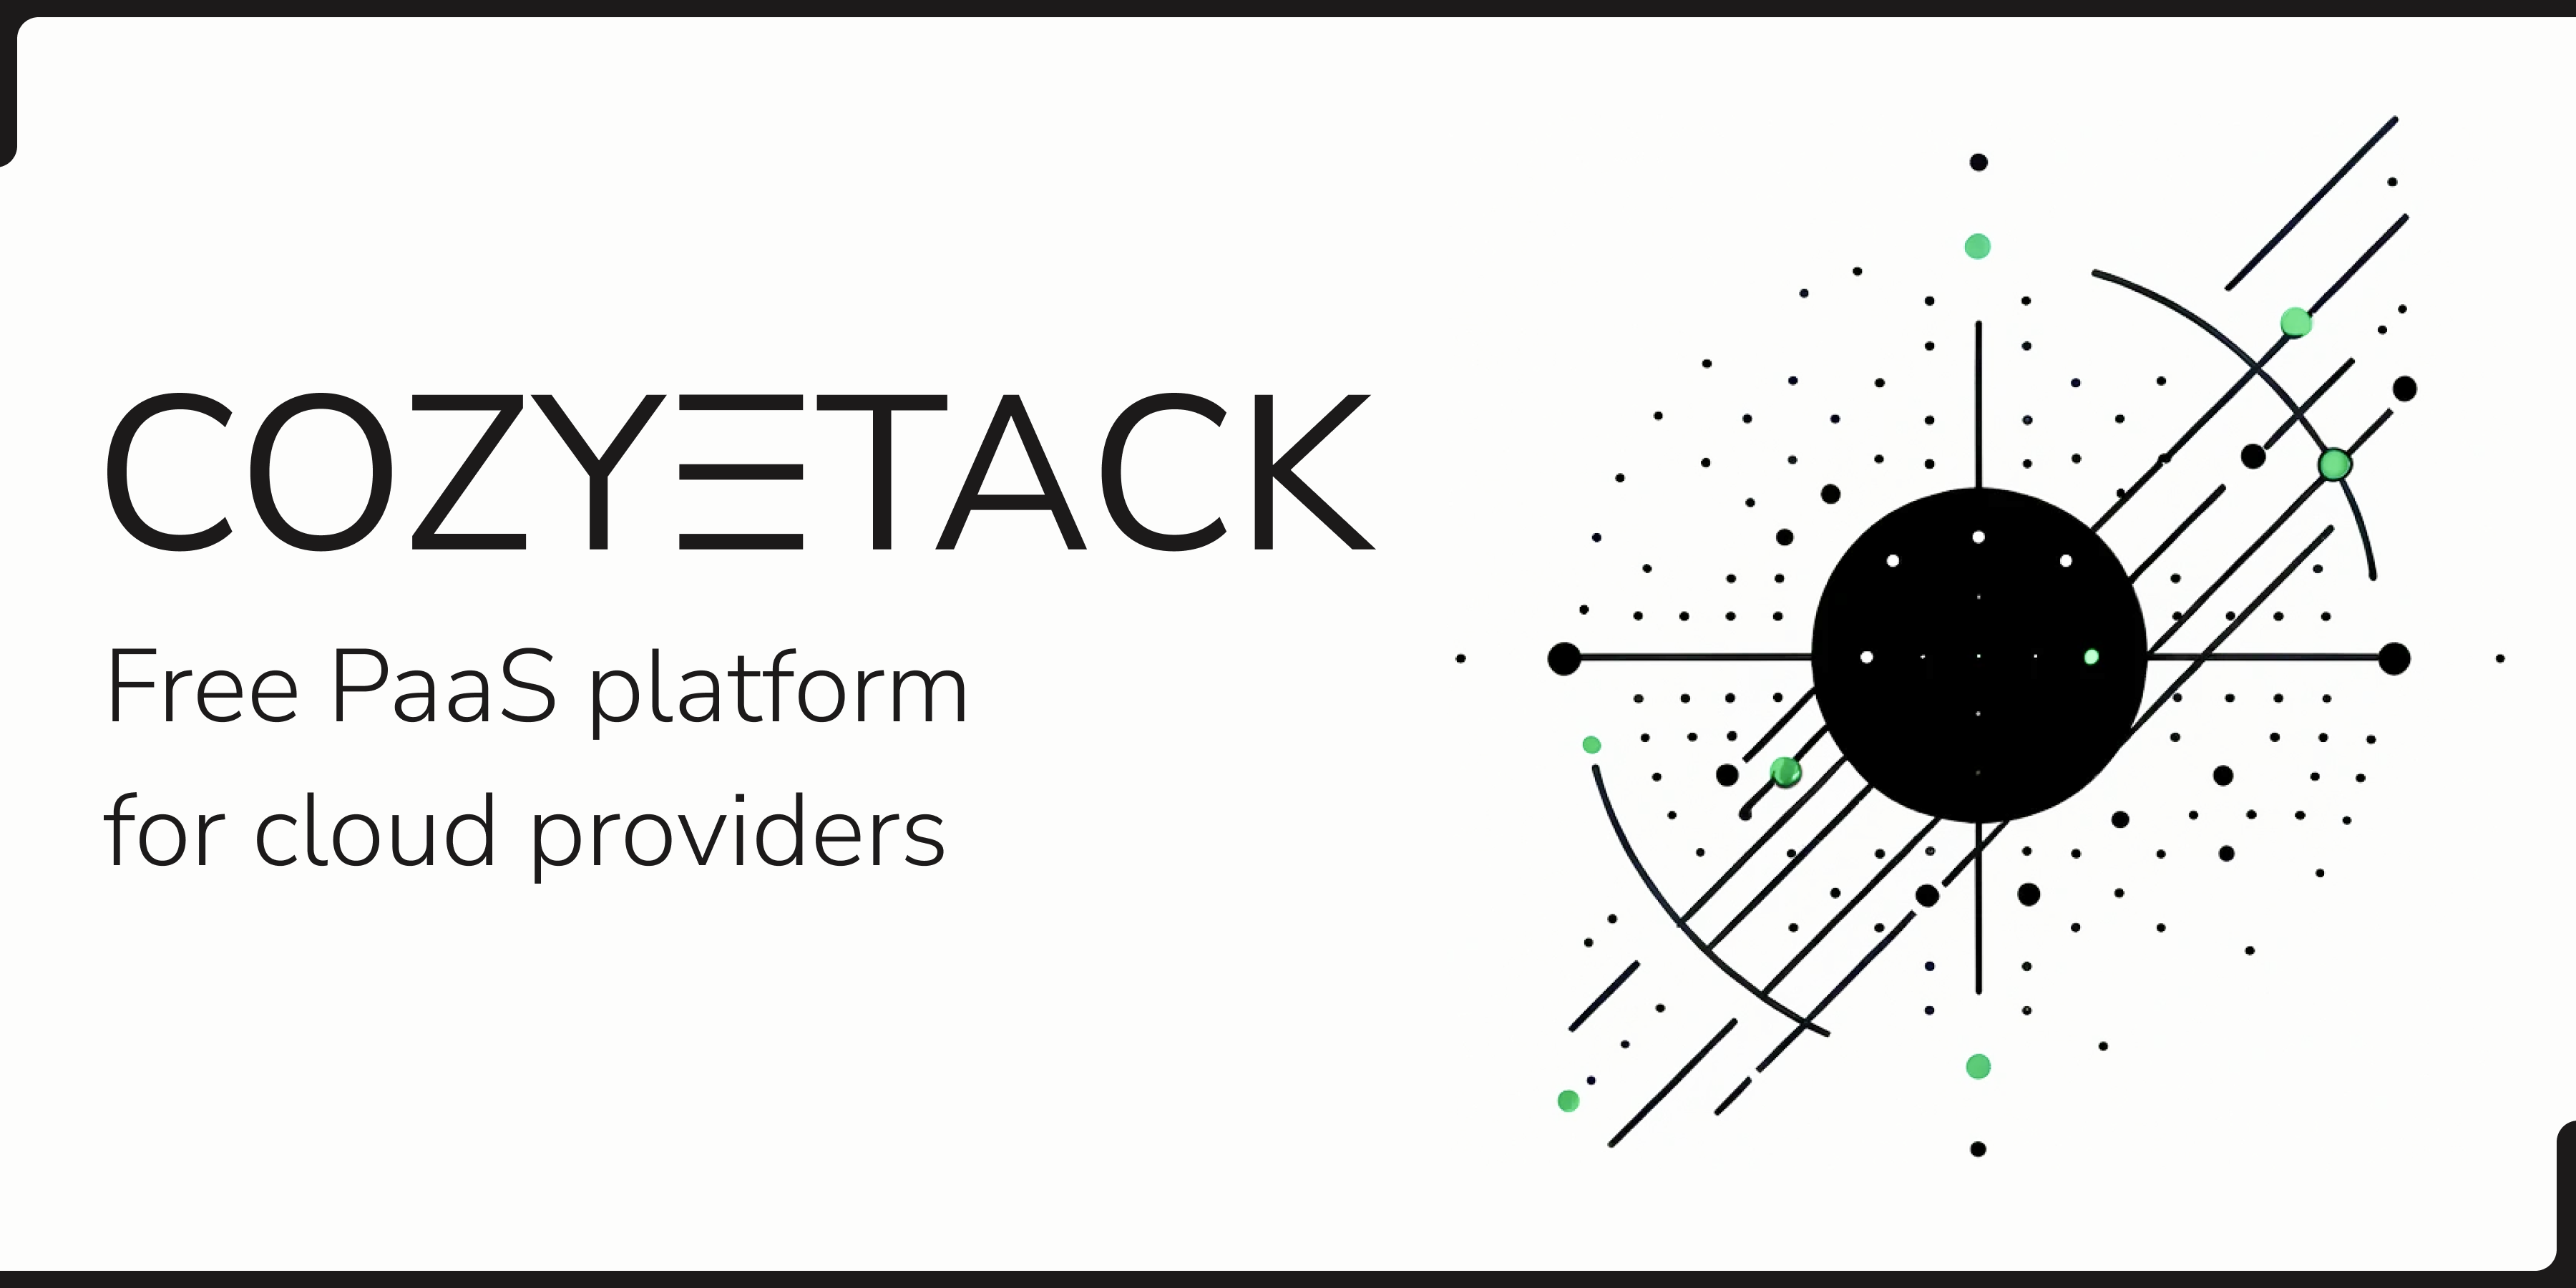 Published the first release of the free PaaS platform Cozystack, based on Kubernetes. The project positioned as a ready-to-use platform for hosting pr